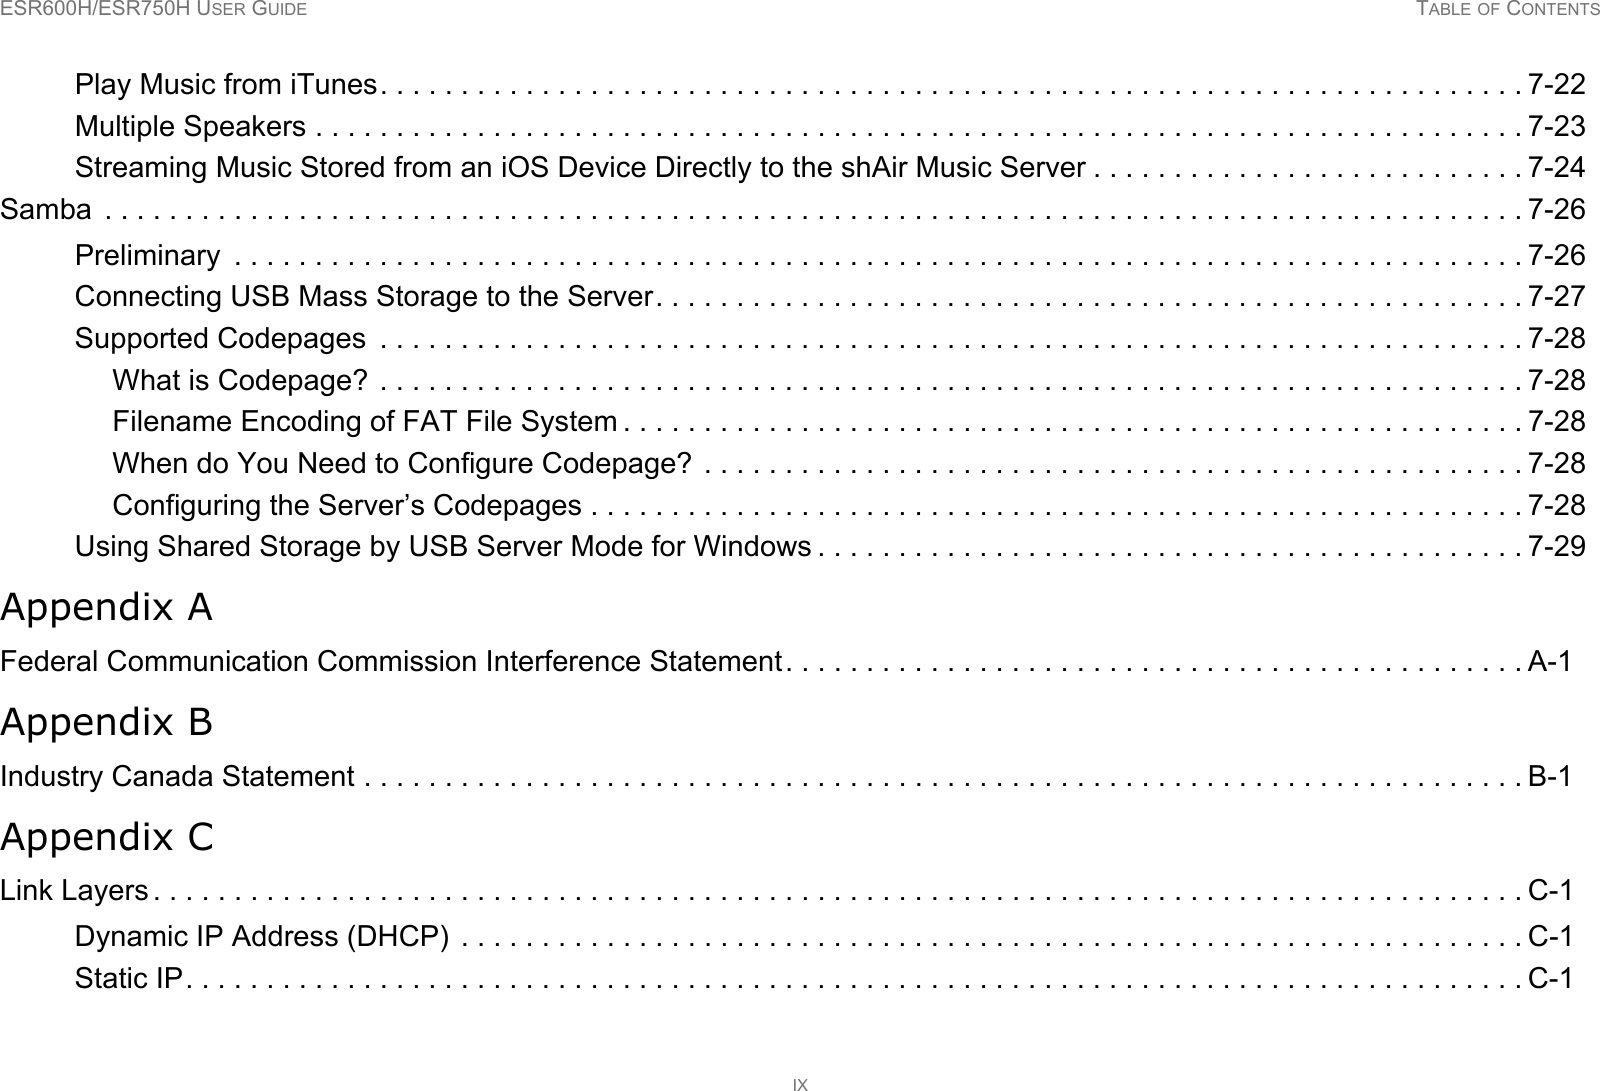 ESR600H/ESR750H USER GUIDE TABLE OF CONTENTSIXPlay Music from iTunes. . . . . . . . . . . . . . . . . . . . . . . . . . . . . . . . . . . . . . . . . . . . . . . . . . . . . . . . . . . . . . . . . . . . . . . 7-22Multiple Speakers . . . . . . . . . . . . . . . . . . . . . . . . . . . . . . . . . . . . . . . . . . . . . . . . . . . . . . . . . . . . . . . . . . . . . . . . . . . 7-23Streaming Music Stored from an iOS Device Directly to the shAir Music Server . . . . . . . . . . . . . . . . . . . . . . . . . . . 7-24Samba  . . . . . . . . . . . . . . . . . . . . . . . . . . . . . . . . . . . . . . . . . . . . . . . . . . . . . . . . . . . . . . . . . . . . . . . . . . . . . . . . . . . . . . . . 7-26Preliminary  . . . . . . . . . . . . . . . . . . . . . . . . . . . . . . . . . . . . . . . . . . . . . . . . . . . . . . . . . . . . . . . . . . . . . . . . . . . . . . . . 7-26Connecting USB Mass Storage to the Server. . . . . . . . . . . . . . . . . . . . . . . . . . . . . . . . . . . . . . . . . . . . . . . . . . . . . . 7-27Supported Codepages  . . . . . . . . . . . . . . . . . . . . . . . . . . . . . . . . . . . . . . . . . . . . . . . . . . . . . . . . . . . . . . . . . . . . . . . 7-28What is Codepage? . . . . . . . . . . . . . . . . . . . . . . . . . . . . . . . . . . . . . . . . . . . . . . . . . . . . . . . . . . . . . . . . . . . . . . . 7-28Filename Encoding of FAT File System . . . . . . . . . . . . . . . . . . . . . . . . . . . . . . . . . . . . . . . . . . . . . . . . . . . . . . . . 7-28When do You Need to Configure Codepage? . . . . . . . . . . . . . . . . . . . . . . . . . . . . . . . . . . . . . . . . . . . . . . . . . . . 7-28Configuring the Server’s Codepages . . . . . . . . . . . . . . . . . . . . . . . . . . . . . . . . . . . . . . . . . . . . . . . . . . . . . . . . . . 7-28Using Shared Storage by USB Server Mode for Windows . . . . . . . . . . . . . . . . . . . . . . . . . . . . . . . . . . . . . . . . . . . . 7-29Appendix AFederal Communication Commission Interference Statement. . . . . . . . . . . . . . . . . . . . . . . . . . . . . . . . . . . . . . . . . . . . . . A-1Appendix BIndustry Canada Statement . . . . . . . . . . . . . . . . . . . . . . . . . . . . . . . . . . . . . . . . . . . . . . . . . . . . . . . . . . . . . . . . . . . . . . . . B-1Appendix CLink Layers . . . . . . . . . . . . . . . . . . . . . . . . . . . . . . . . . . . . . . . . . . . . . . . . . . . . . . . . . . . . . . . . . . . . . . . . . . . . . . . . . . . . . C-1Dynamic IP Address (DHCP)  . . . . . . . . . . . . . . . . . . . . . . . . . . . . . . . . . . . . . . . . . . . . . . . . . . . . . . . . . . . . . . . . . . C-1Static IP. . . . . . . . . . . . . . . . . . . . . . . . . . . . . . . . . . . . . . . . . . . . . . . . . . . . . . . . . . . . . . . . . . . . . . . . . . . . . . . . . . . C-1